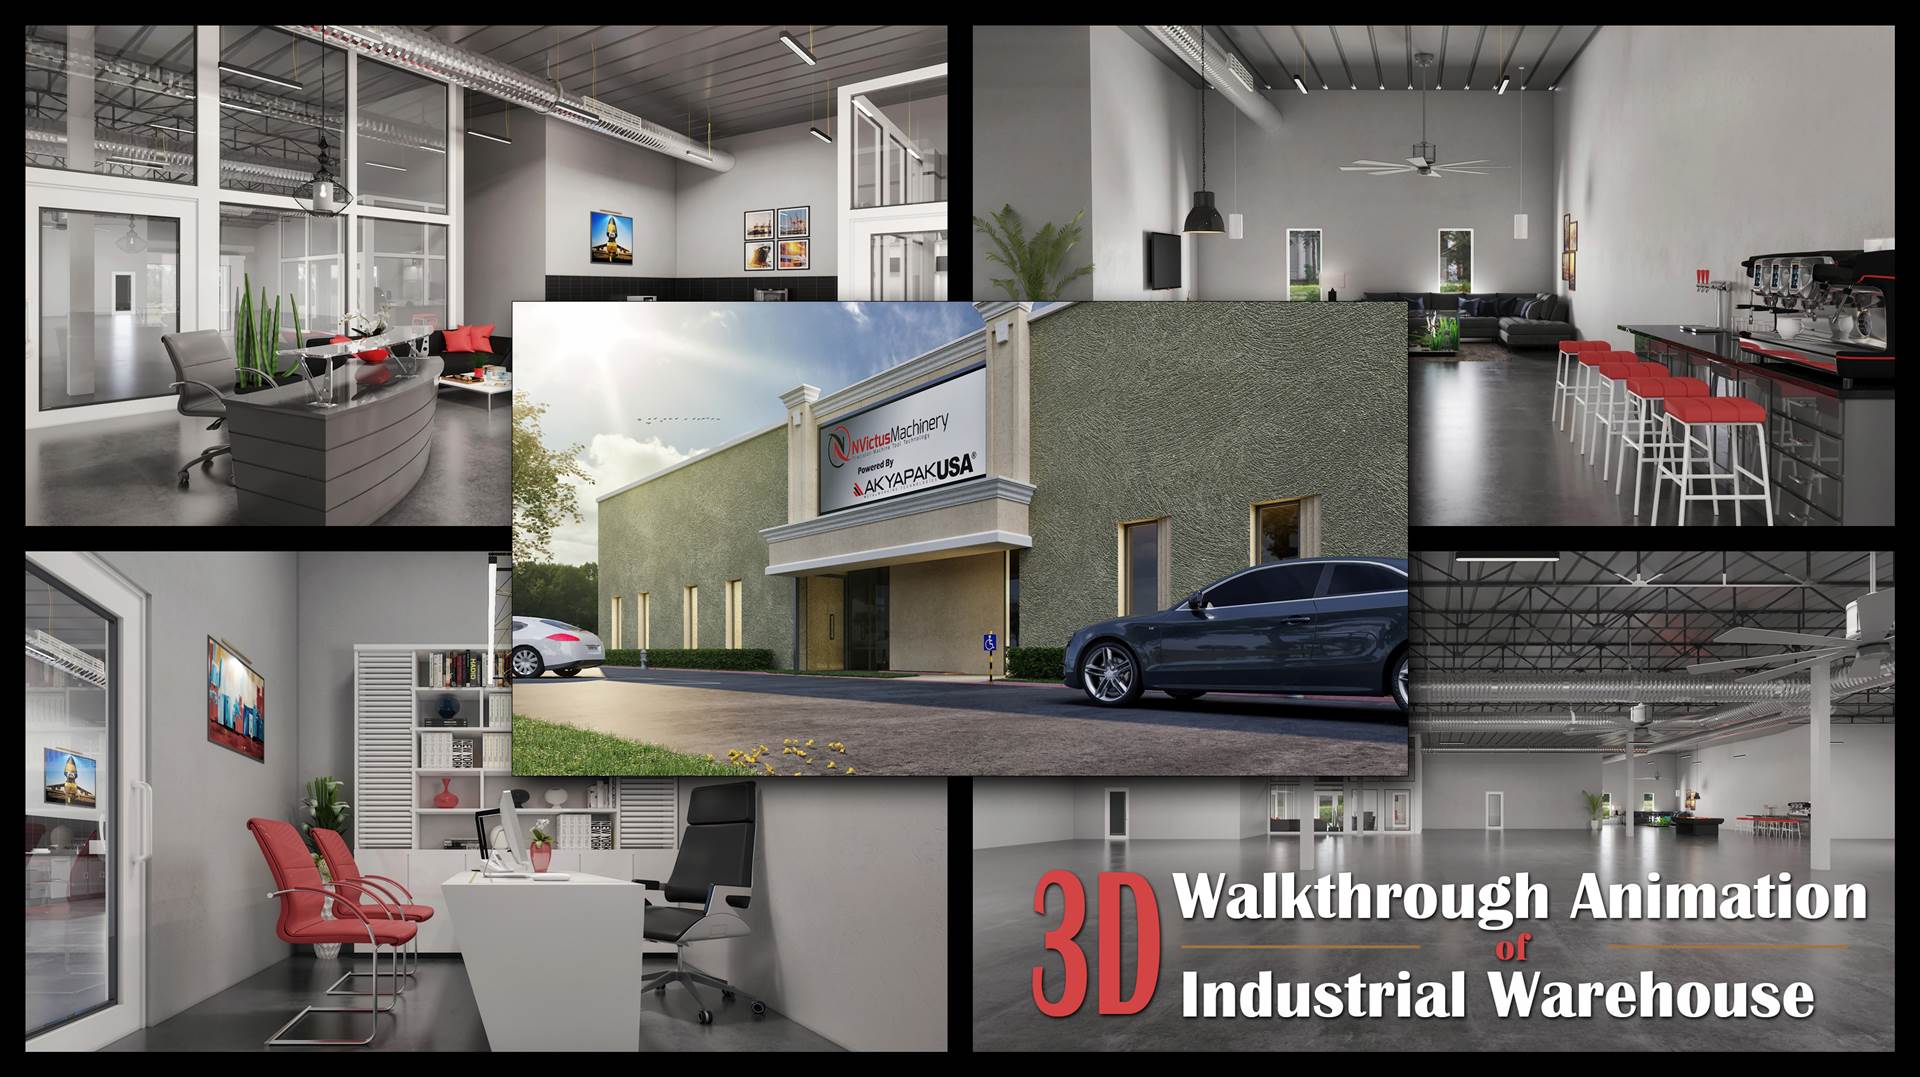 3D Walkthrough Animation Of Industrial Warehouse Office 3D Interior Rendering Services by Architectural Modeling Firm.jpg -  by Yantramarchitecturaldesignstudio